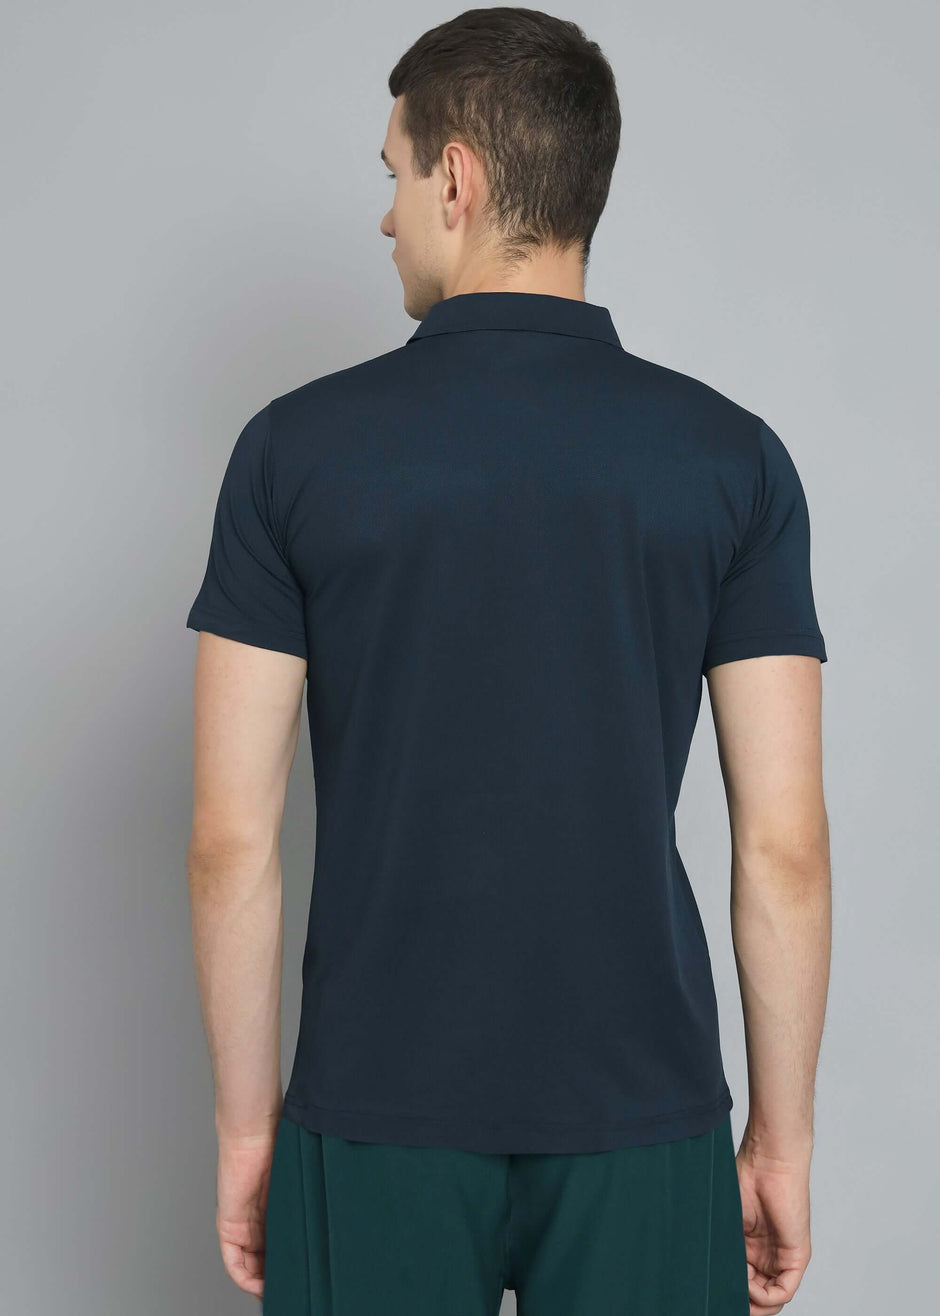 Men's Navy Blue Polo Neck T-Shirt | Active Fit Tee